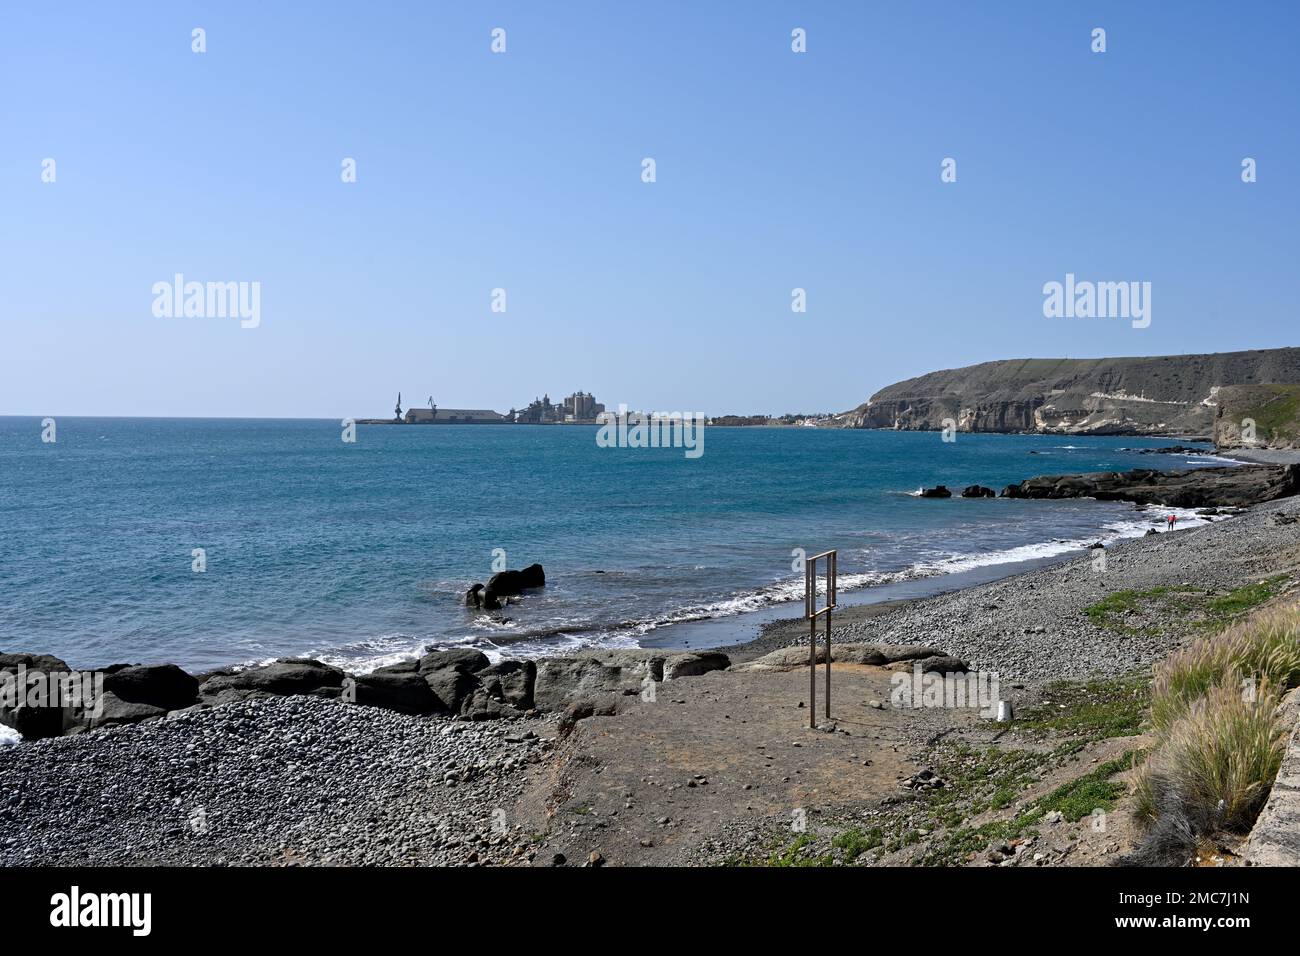 Playa de Triana pebble beach looking toward cement works in Peninsula with El Pajar which locals want to keep and central government want to convert t Stock Photo